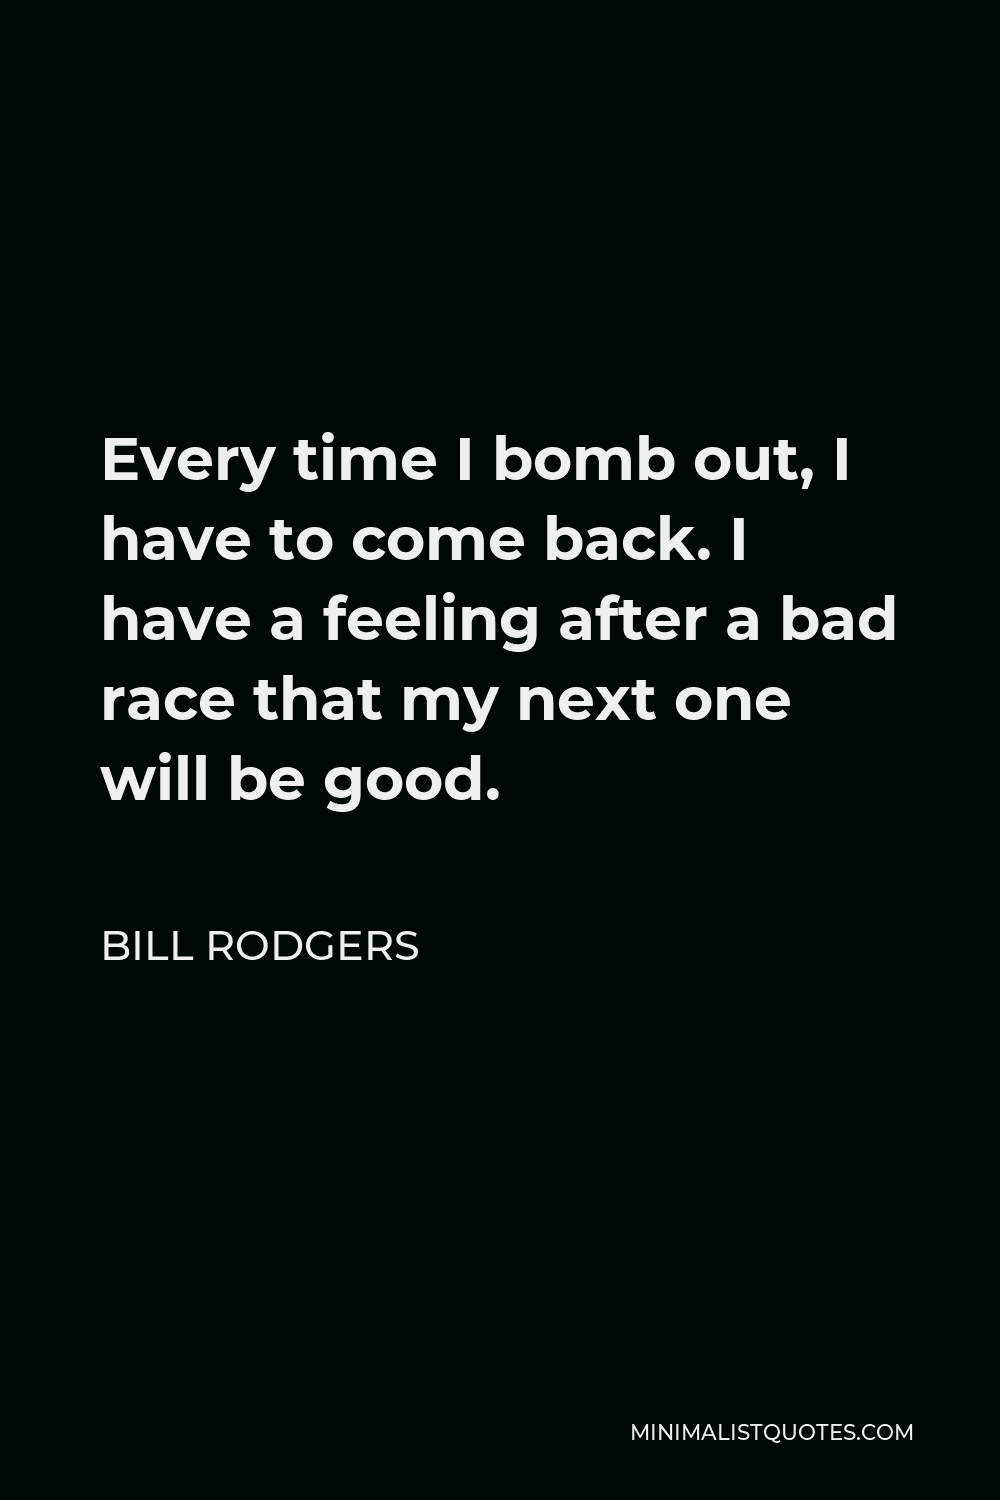 Bill Rodgers Quote - Every time I bomb out, I have to come back. I have a feeling after a bad race that my next one will be good.